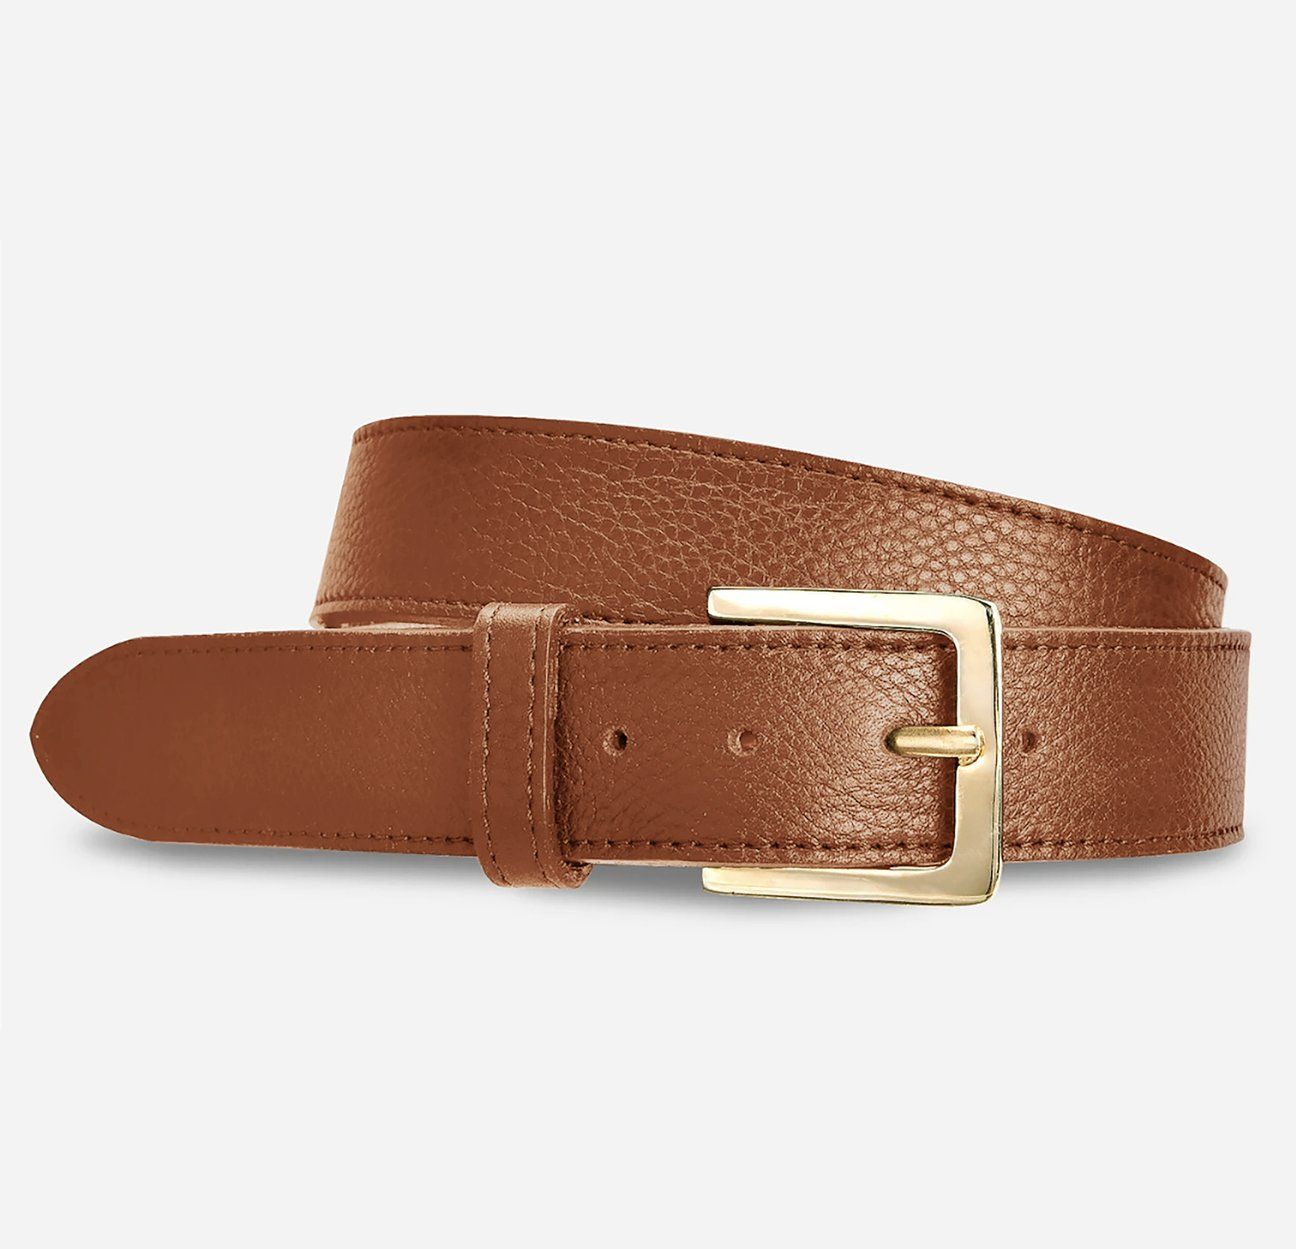 Accessorize with Flair: Brown Belts for Versatile Style